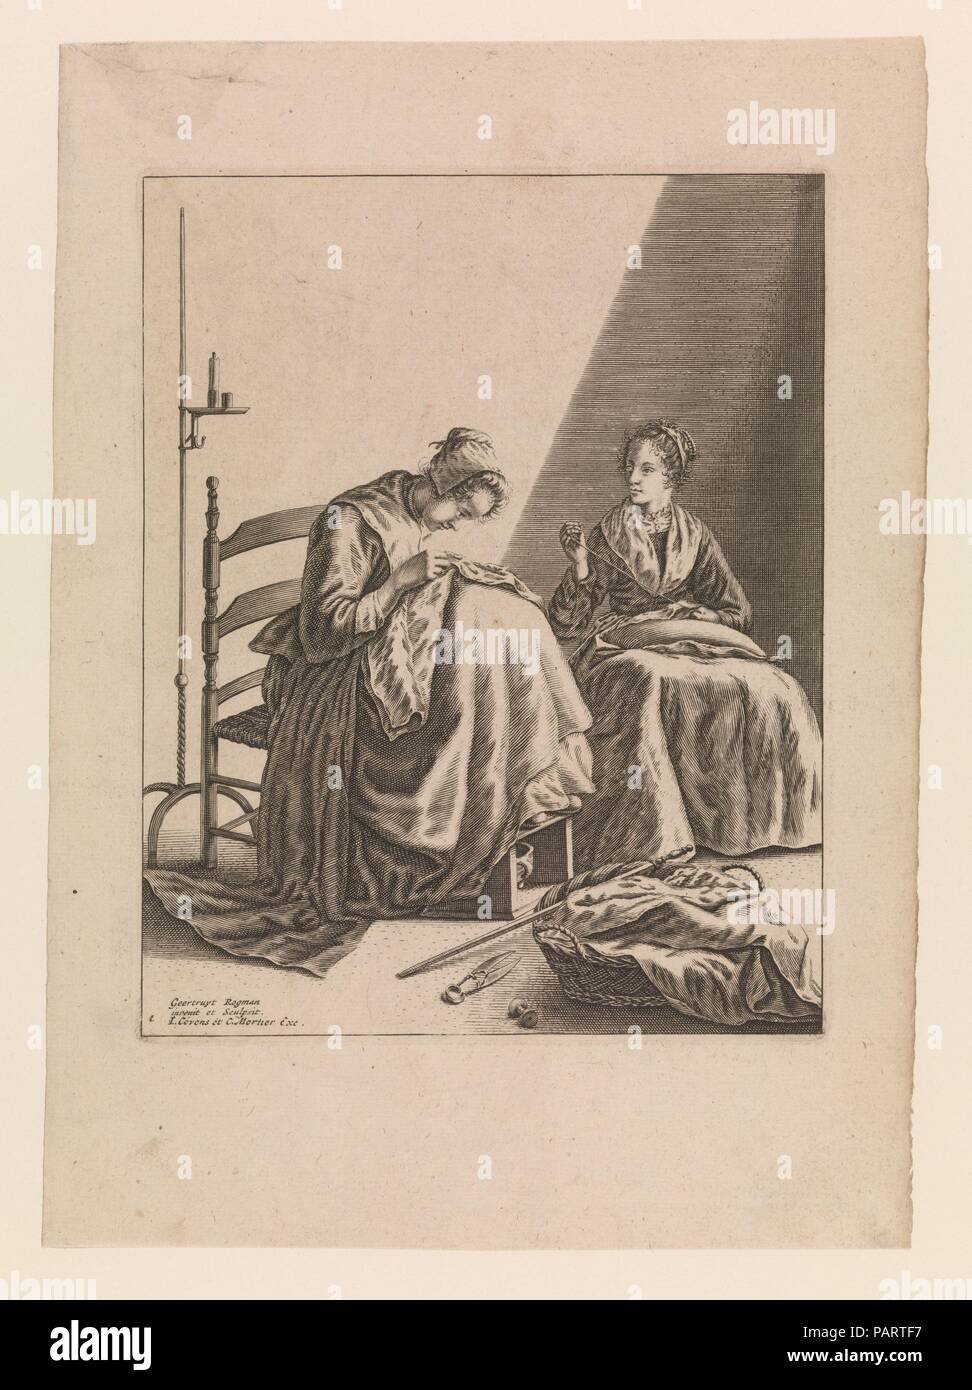 Two Women Sewing, Plate 1 from Five Feminine Occupations. Artist: Geertruydt Roghman (Dutch, Amsterdam 1625-1651/57 Amsterdam (?)). Dimensions: Plate: 8 3/8 x 6 1/2 in. (21.2 x 16.5 cm)  Sheet: 11 1/2 x 8 5/16 in. (29.2 x 21.1 cm). Publisher: Covens et Mortier (Dutch, 17th century). Date: ca. 1640-57.  Roghman, from an Amsterdam family of artists, is known for some reproductive prints and her original suite of five engravings, 'Household Tasks': sewing, spinning, reading (?), cooking, and cleaning cookware (see 56.550.2-.6). The two subjects set in kitchens are unusual in that the solitary mai Stock Photo